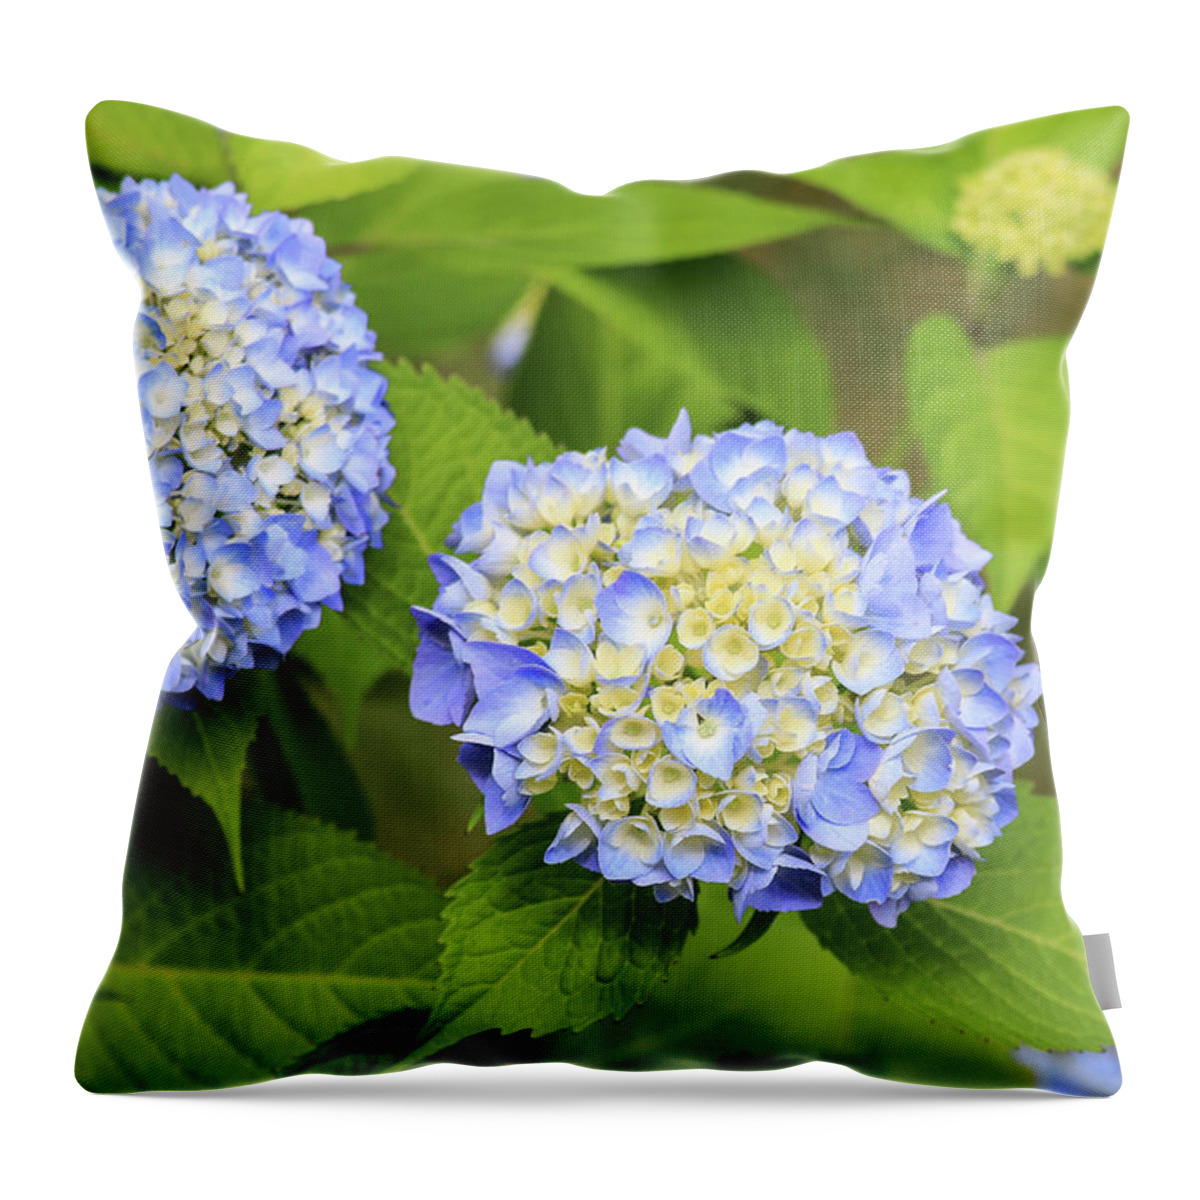 Colors Throw Pillow featuring the photograph Blue Hydrangea Deux by Tanya Owens